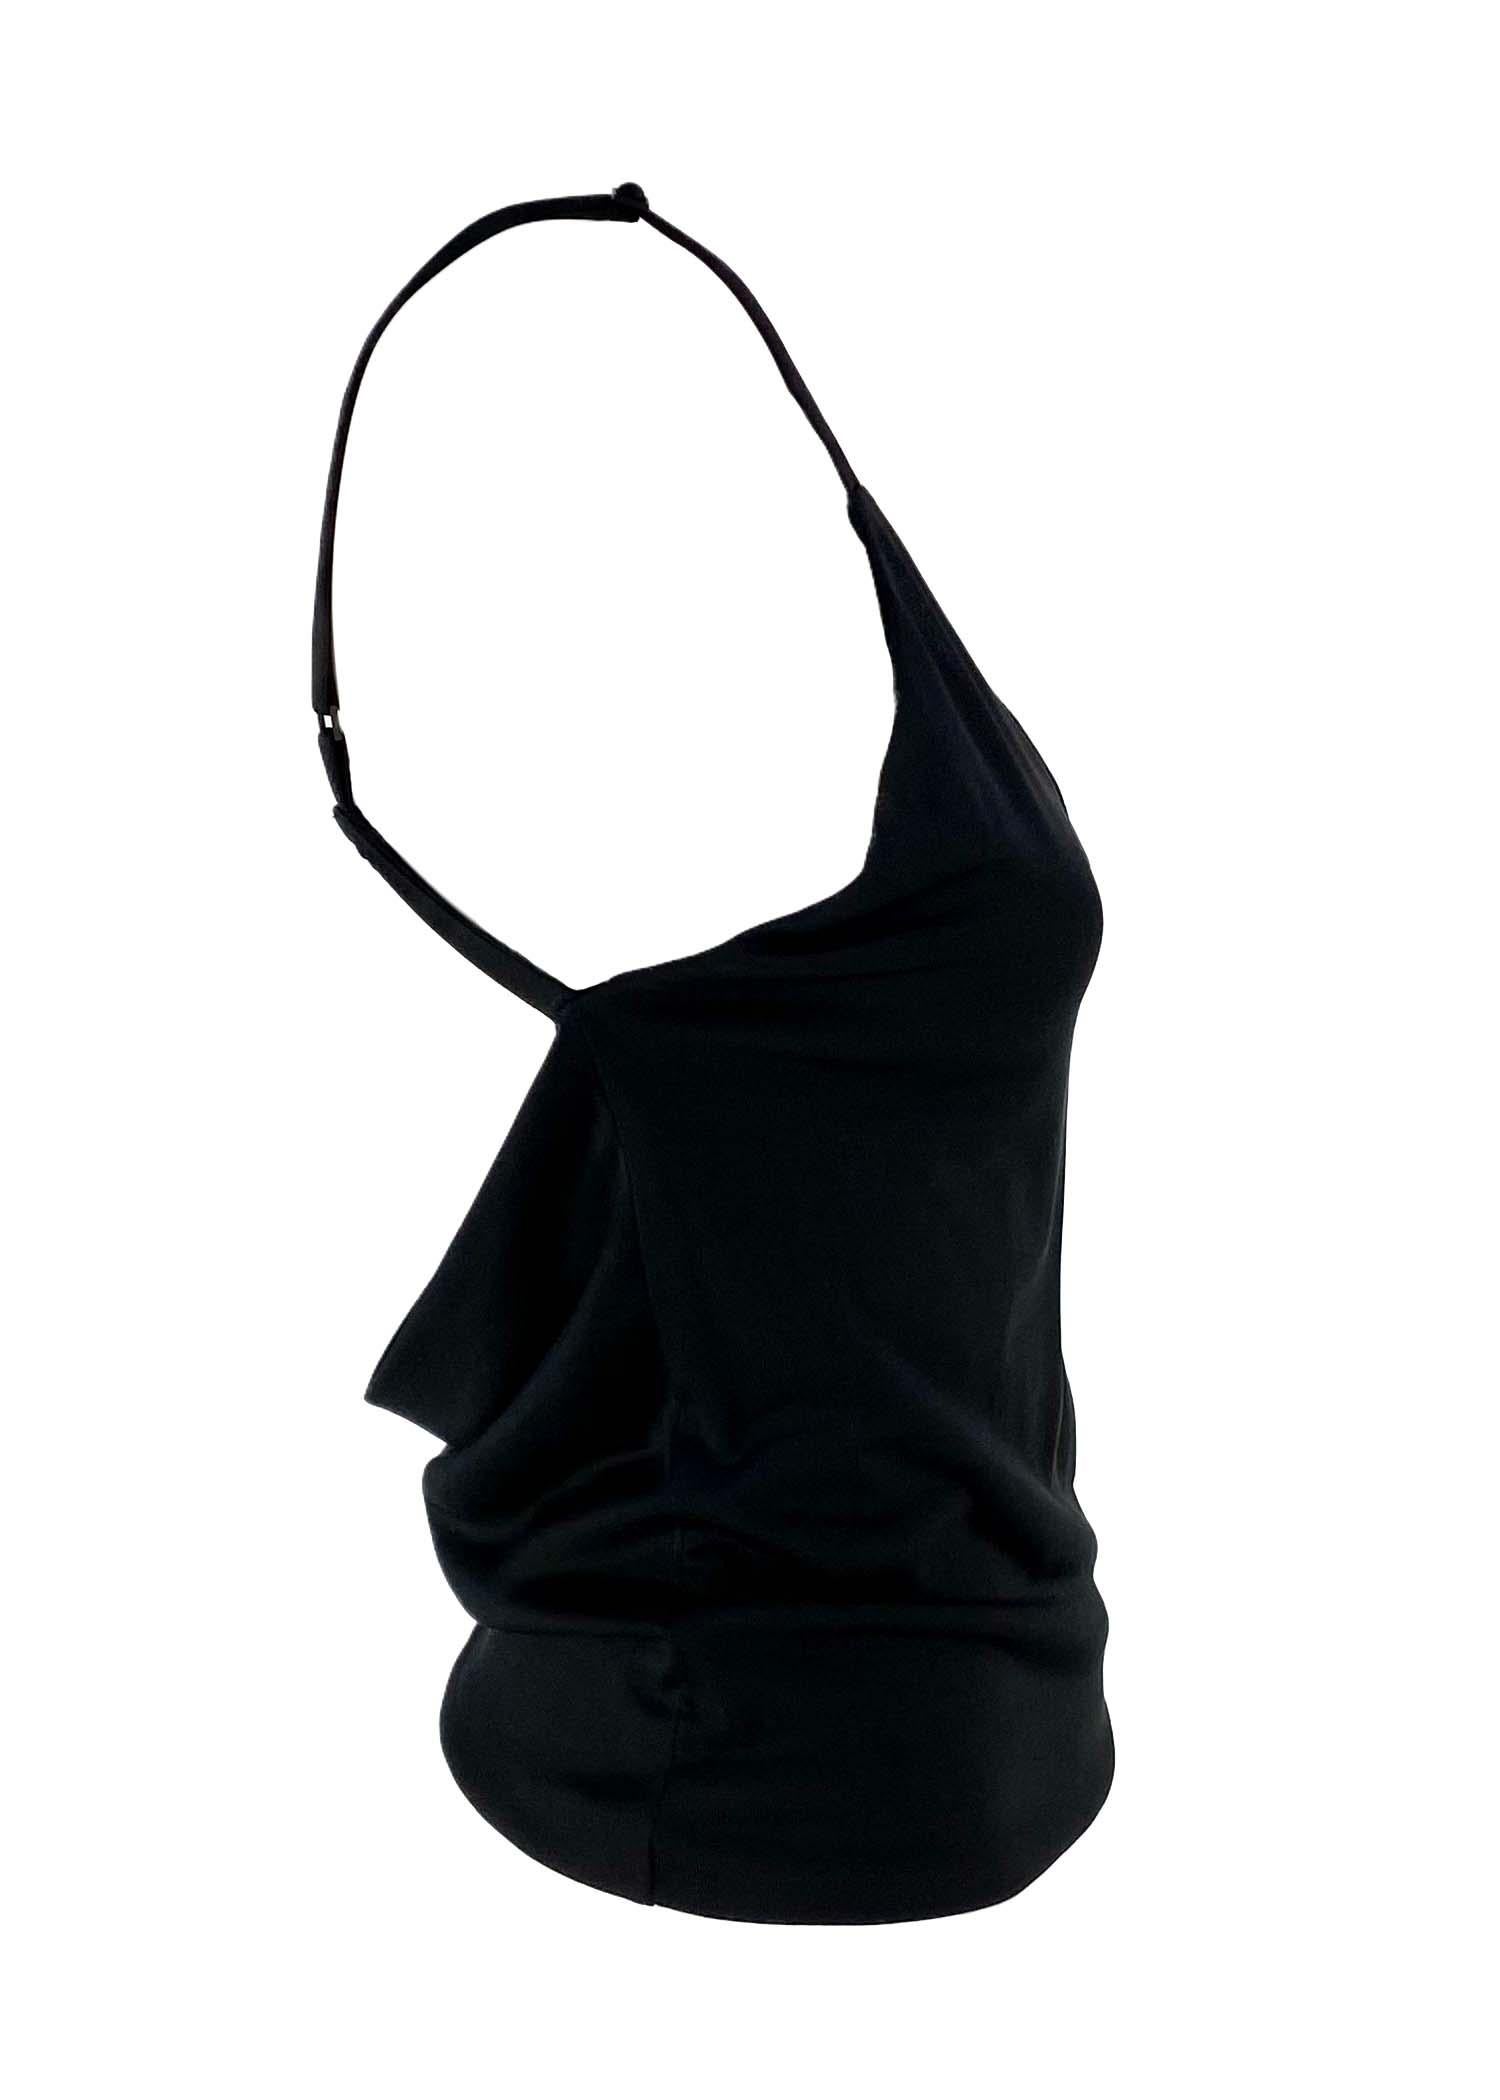 S/S 2001 Gucci by Tom Ford Backless Bra Strap Black Top For Sale at 1stDibs